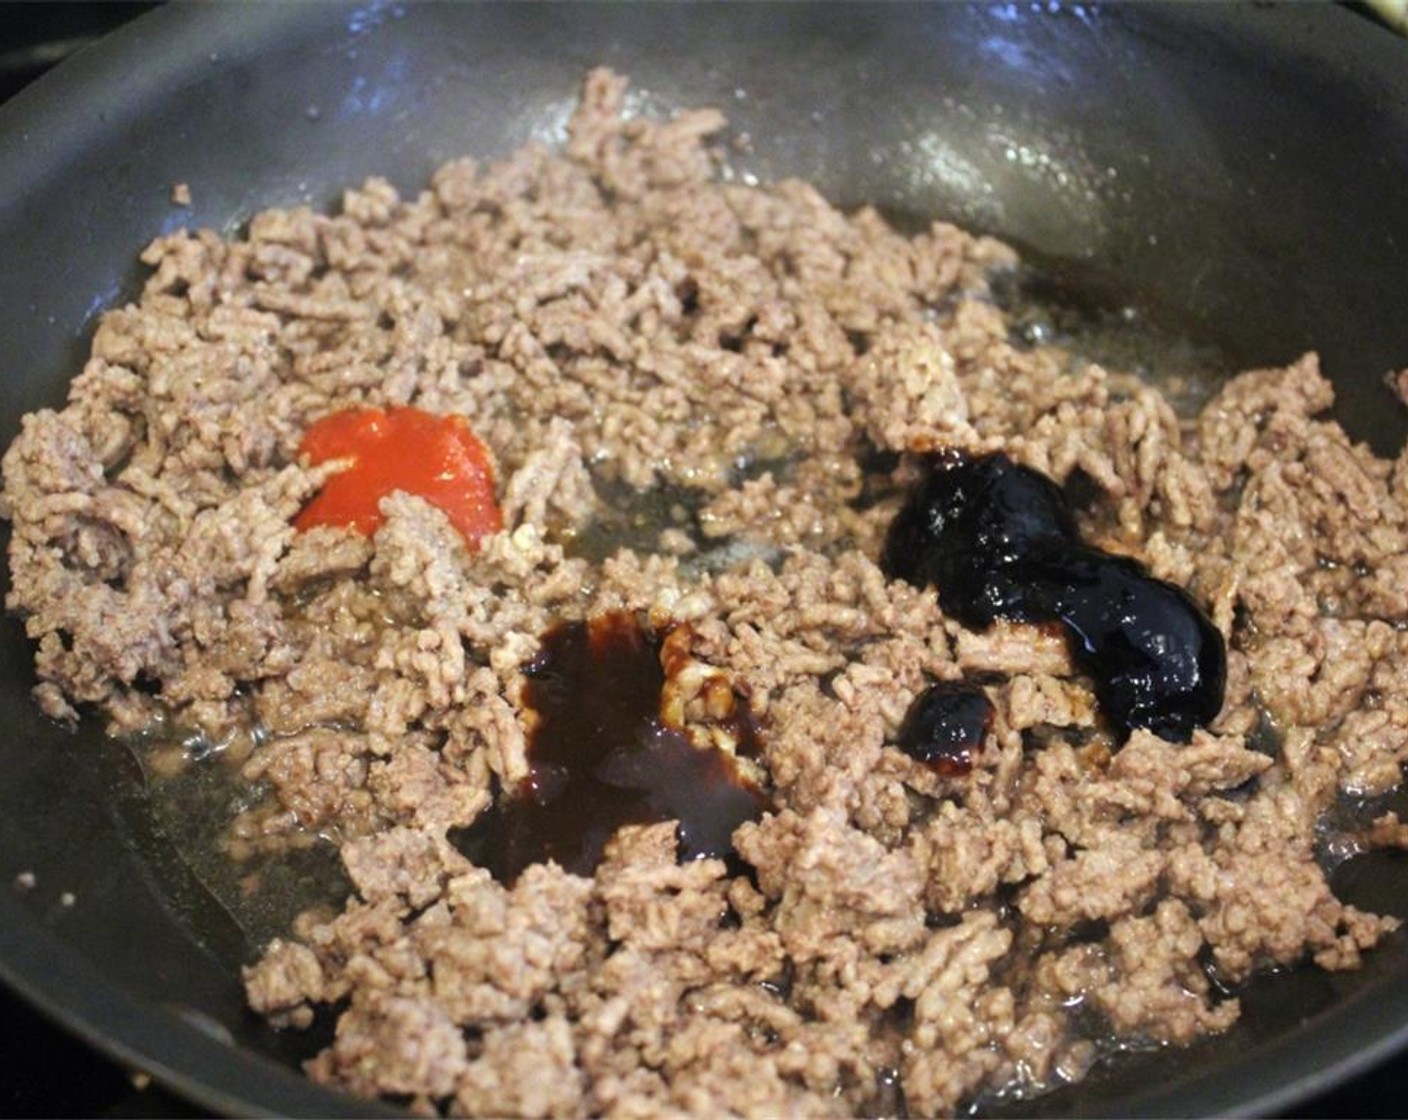 step 2 After the meat begins to brown, add the Hoisin Sauce (1 Tbsp), Oyster Sauce (1 Tbsp), and Sriracha (1 tsp).